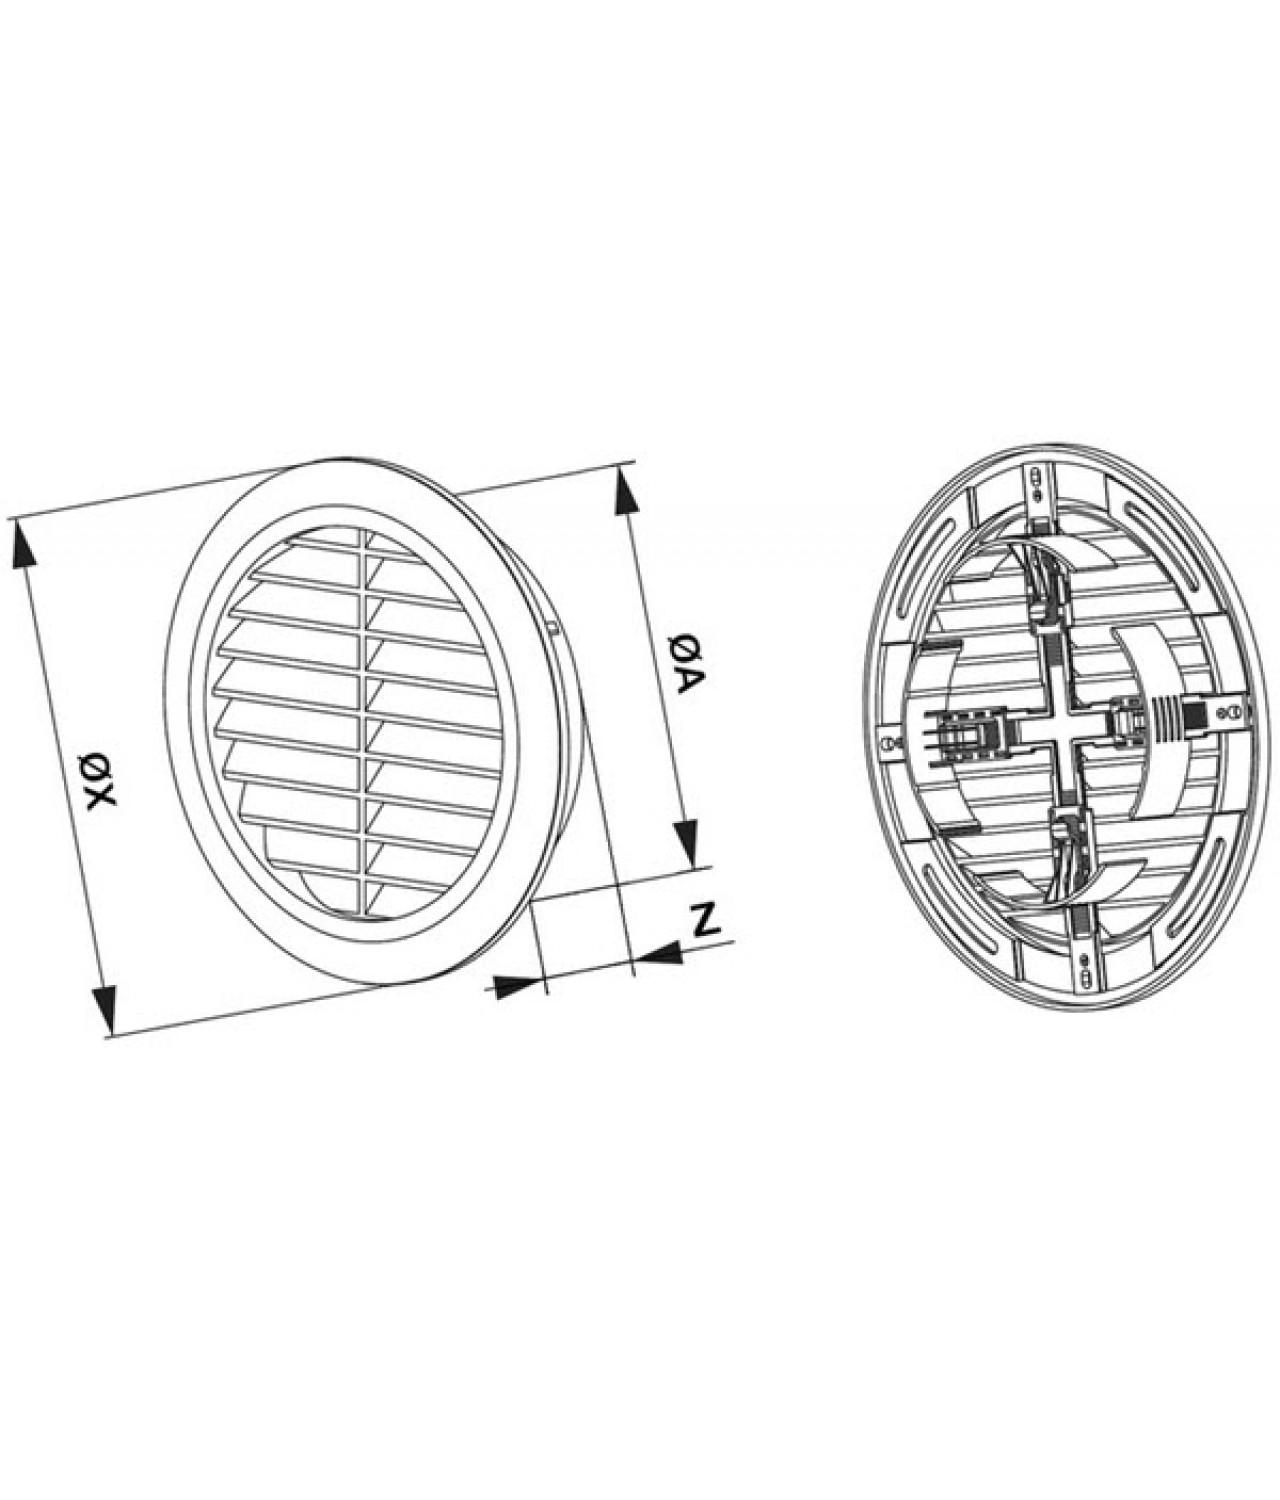 Vent cover GRT36M, Ø100-150/180 mm - drawing